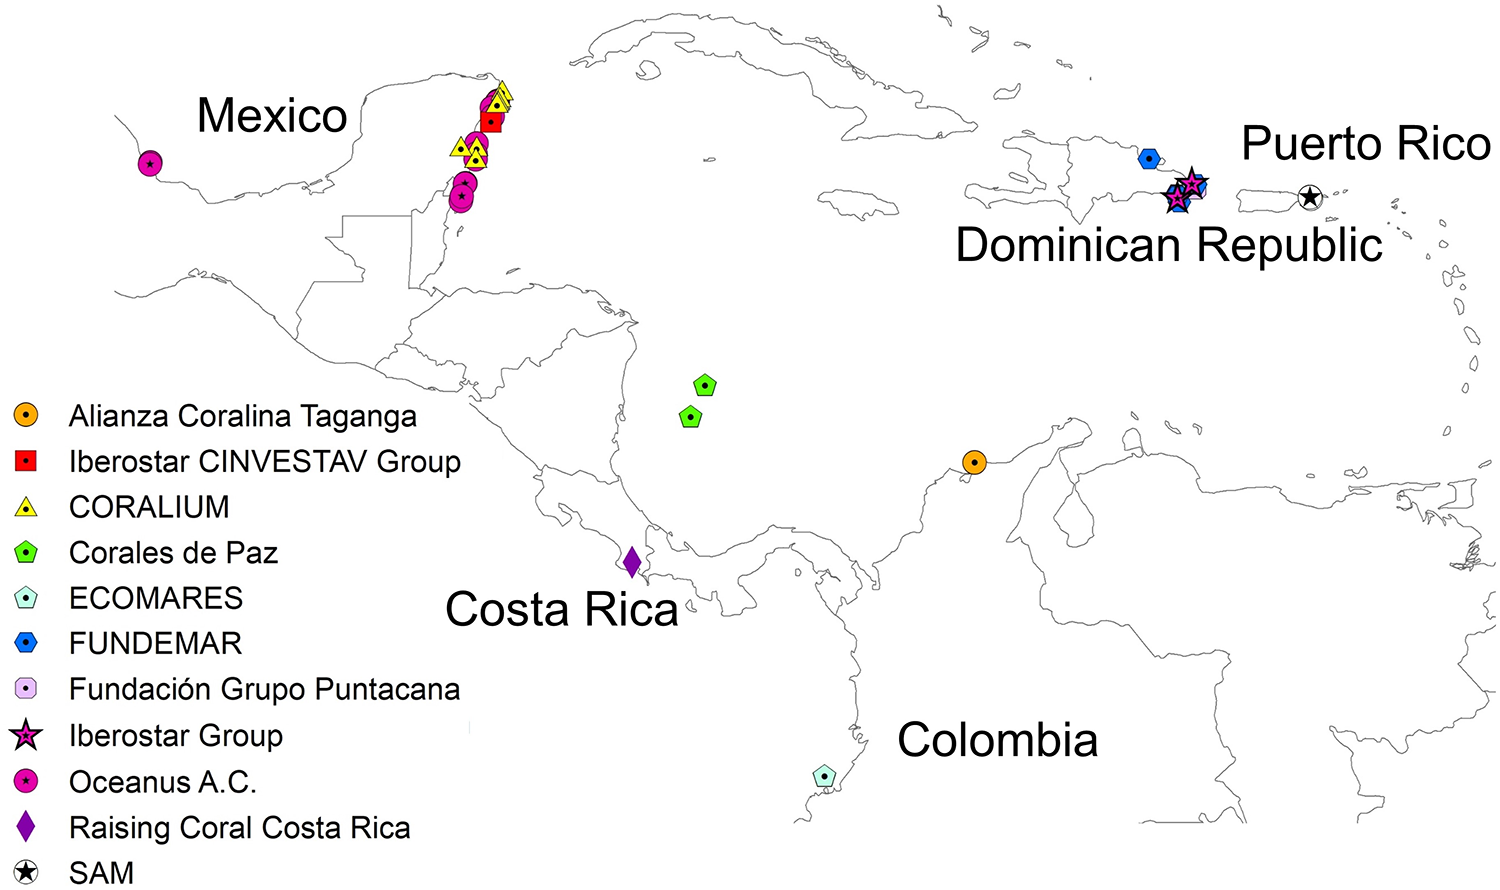 Where large coral reef projects exist in Latin and Central America